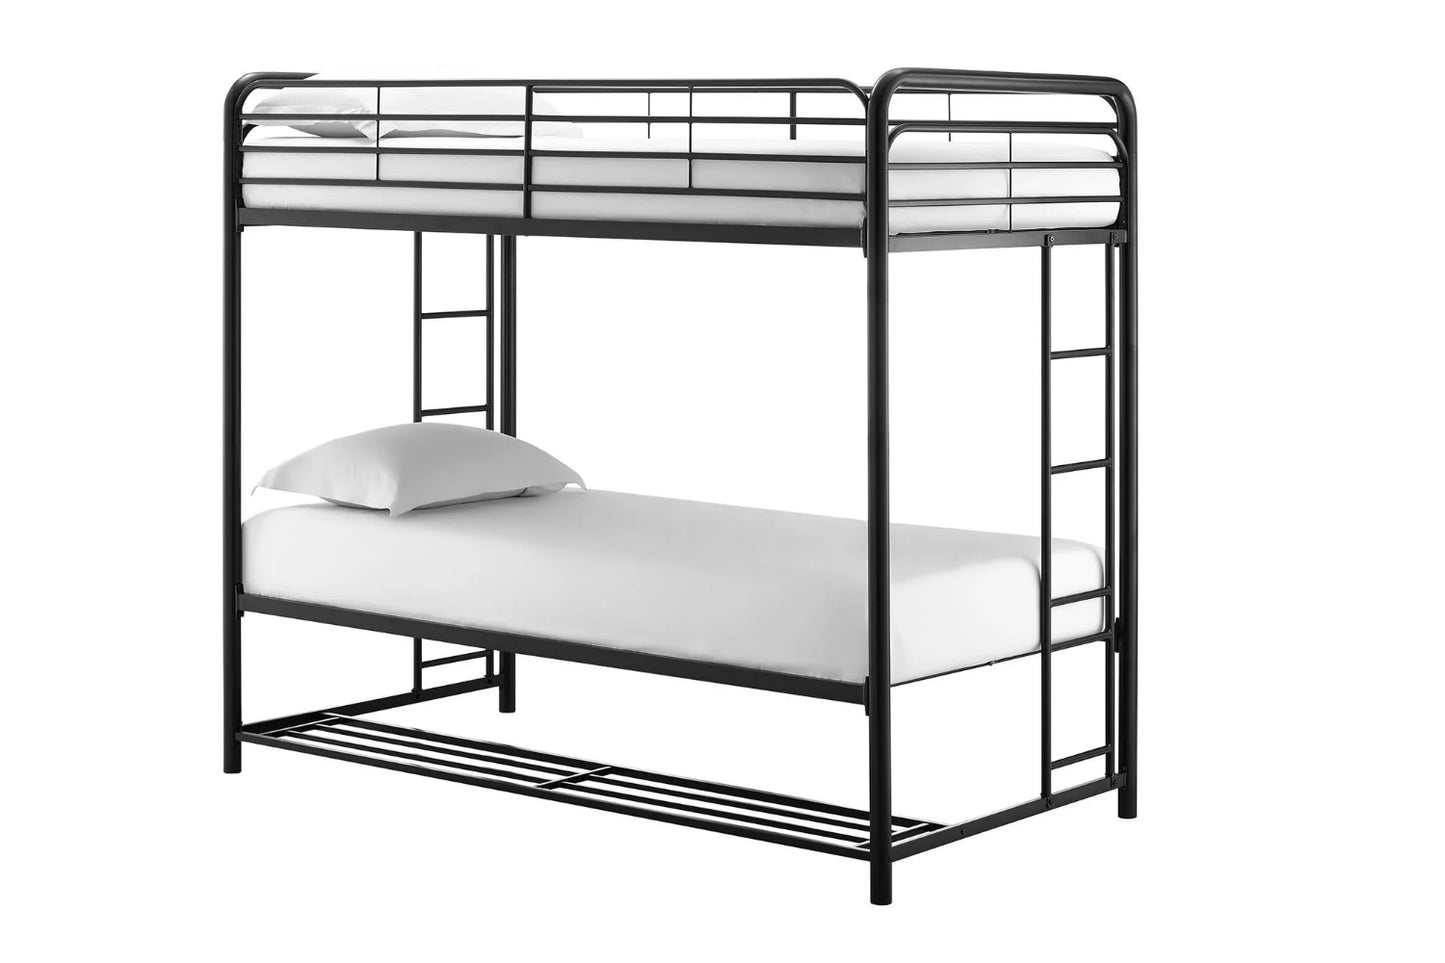 Mainstays Twin over Twin Metal Bunk Bed with Storage Bins